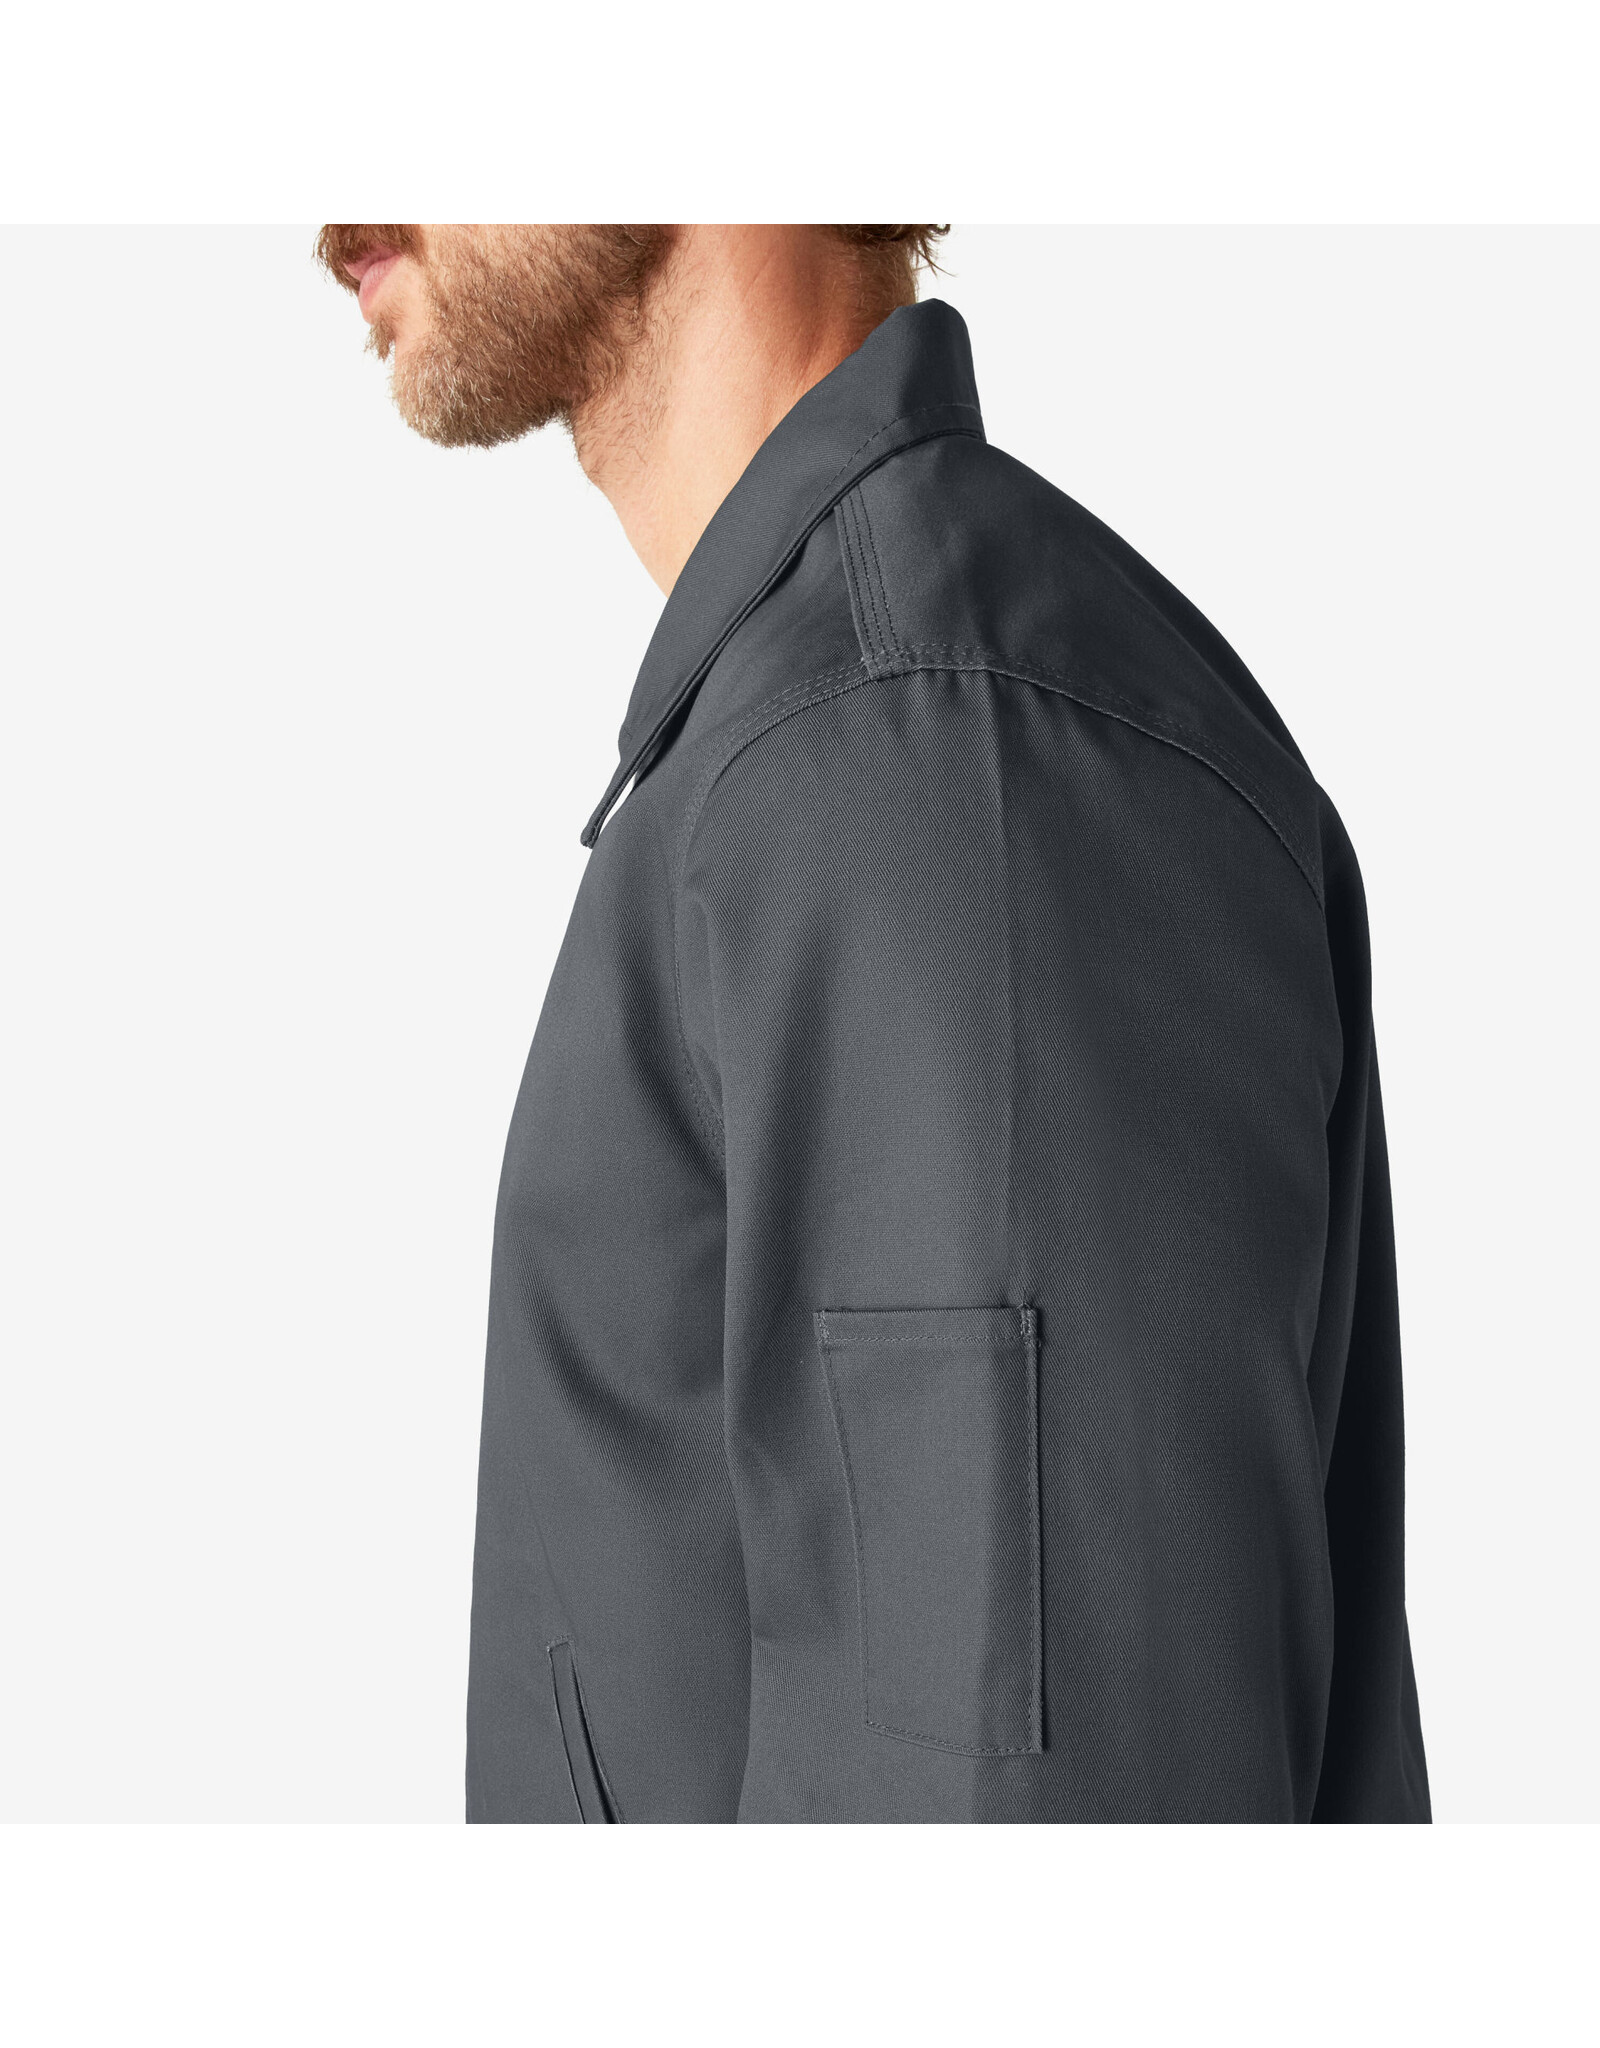 DICKIES Unlined Eisenhower Jacket Charcoal - JT75CH